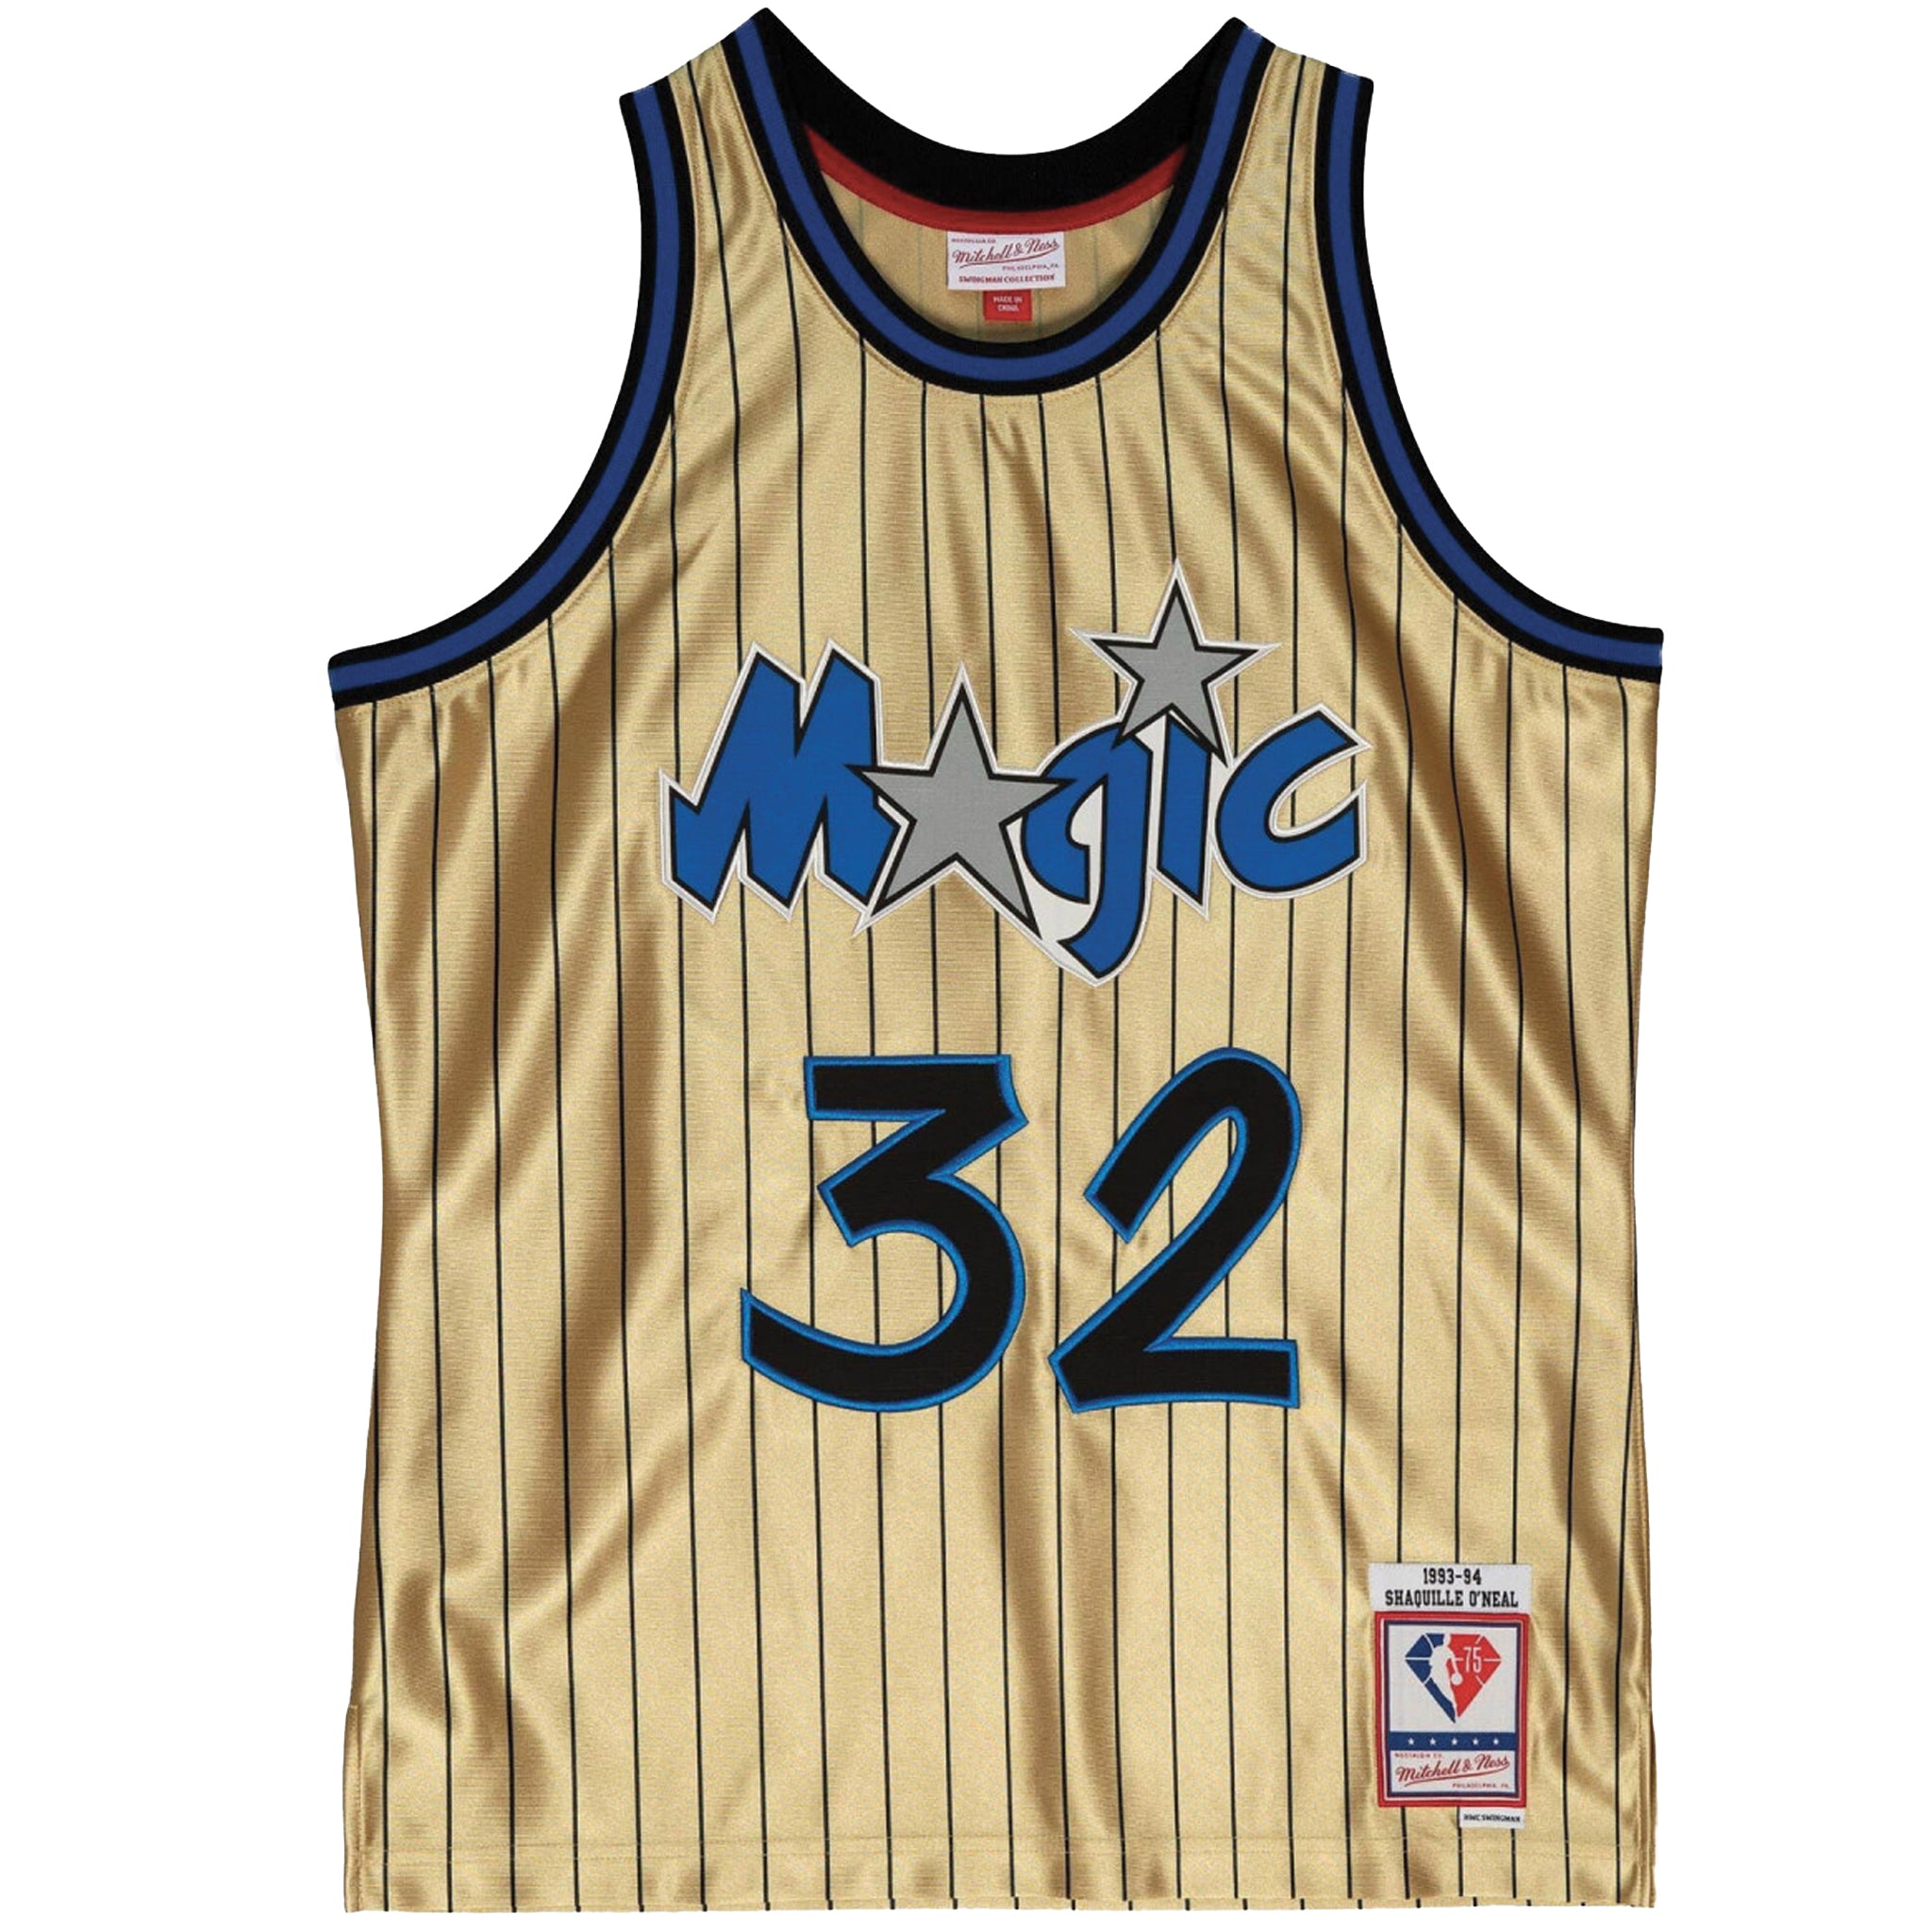 Toevoeging Voorstad Lezen Mitchell & Ness Men's 75th Anniversary Gold Swingman Shaquille O'Neal –  That Shoe Store and More